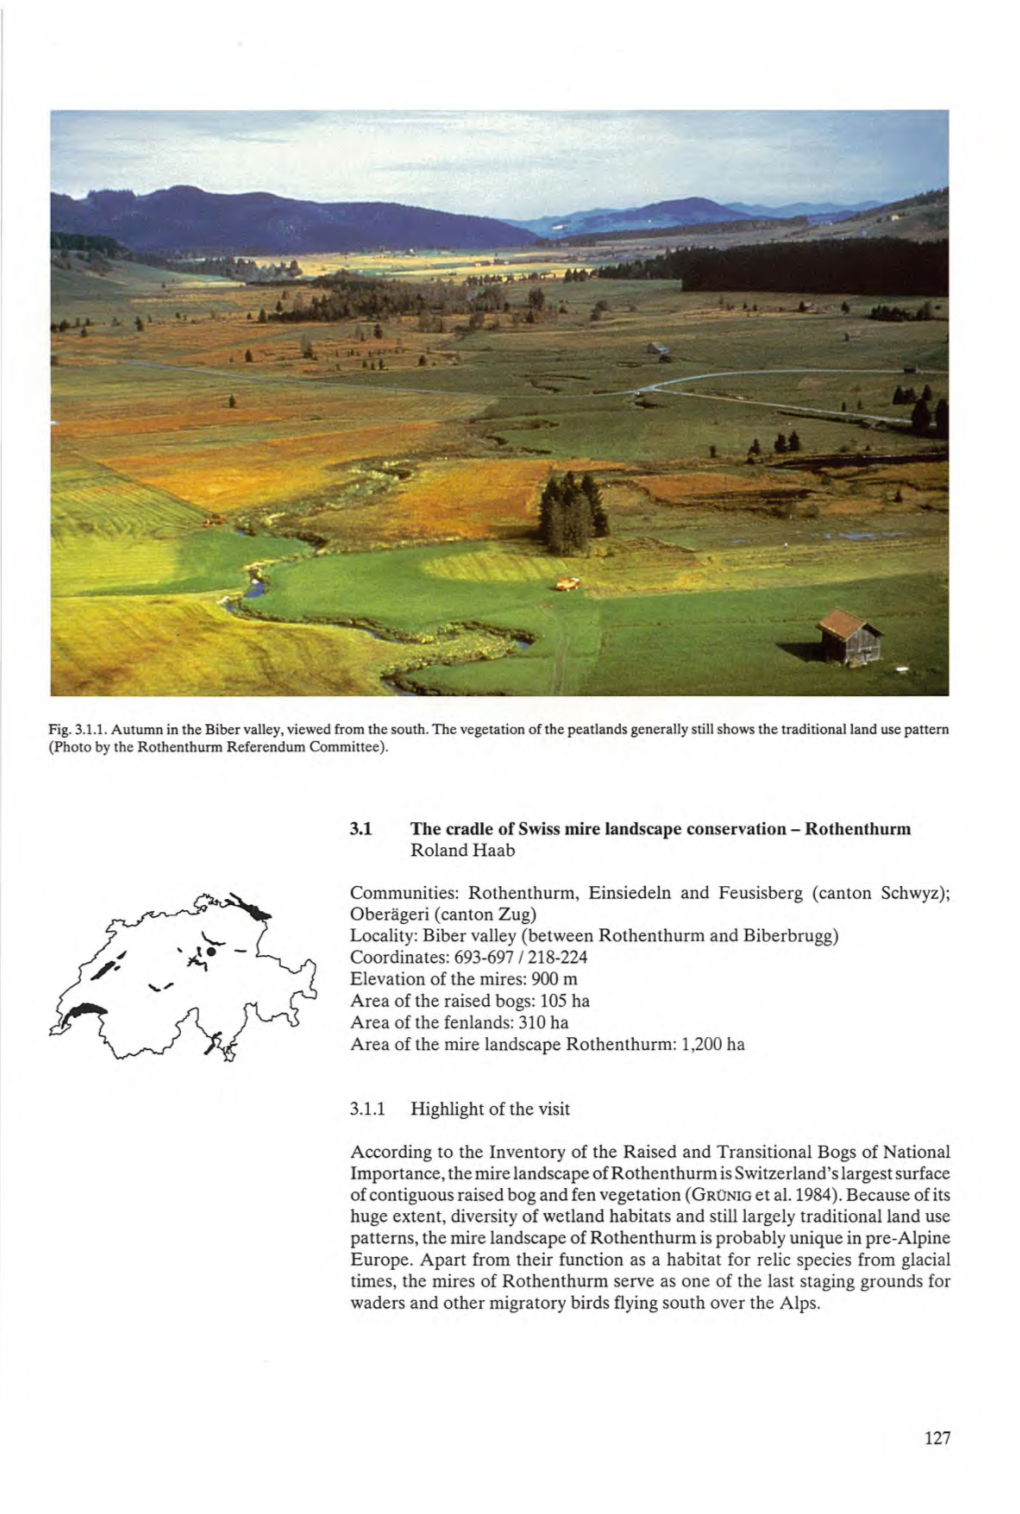 3.1 the Cradle of Swiss Mire Landscape Conservation - Rothenthurm Roland Haab